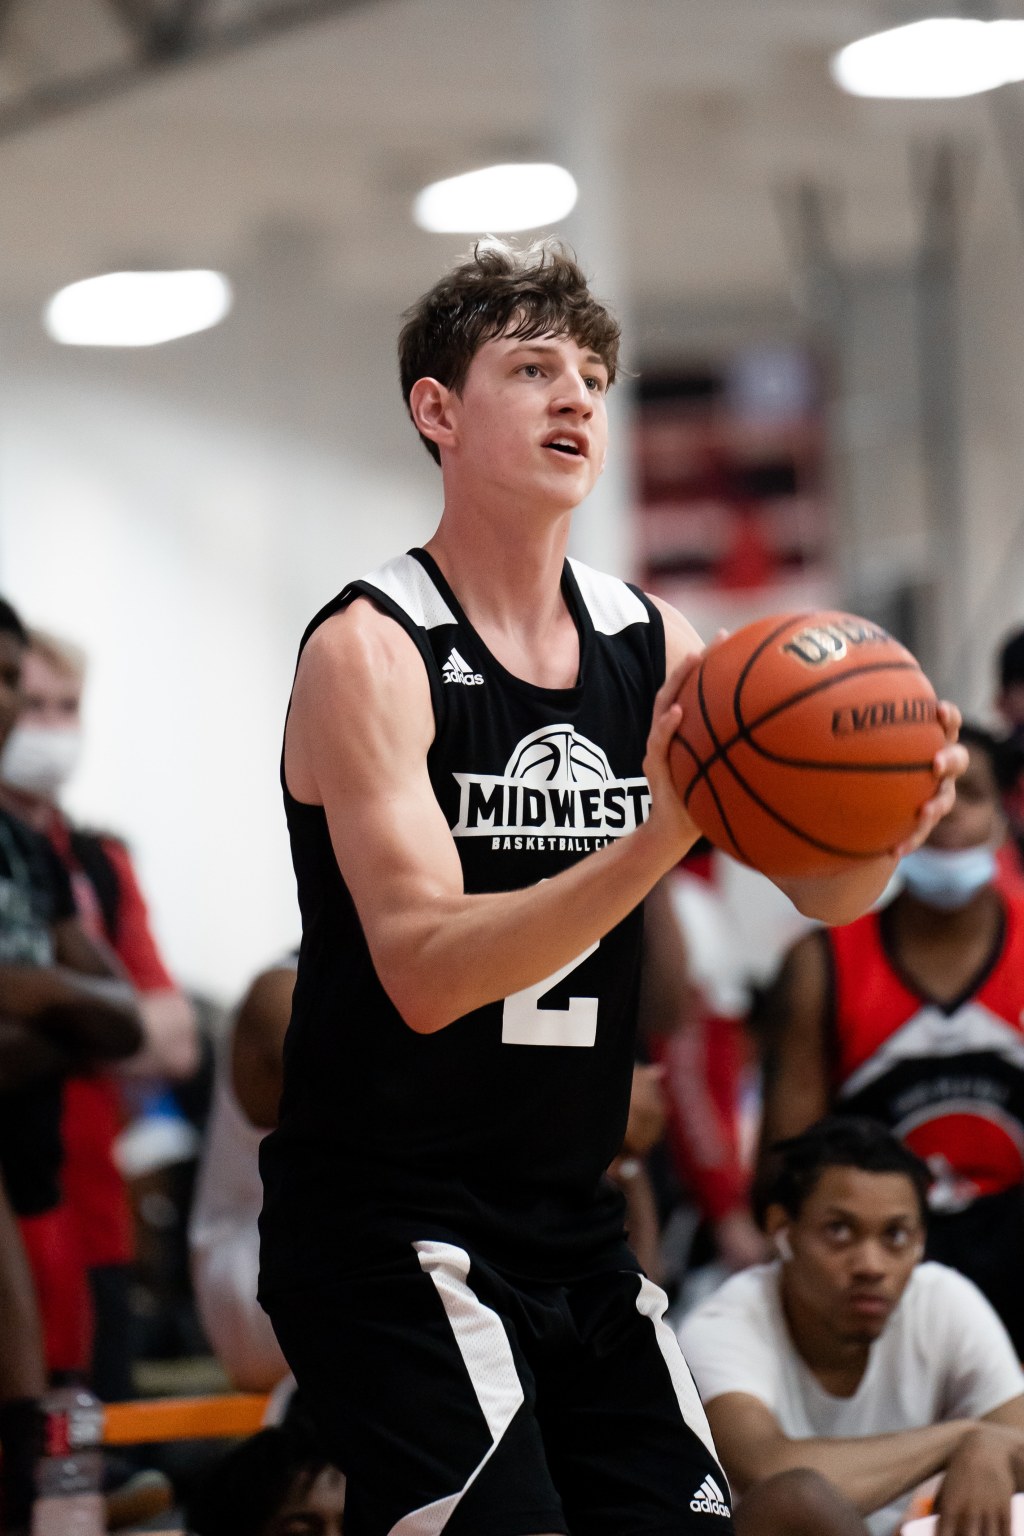 Dayton's Top Performing 2021 Prospects